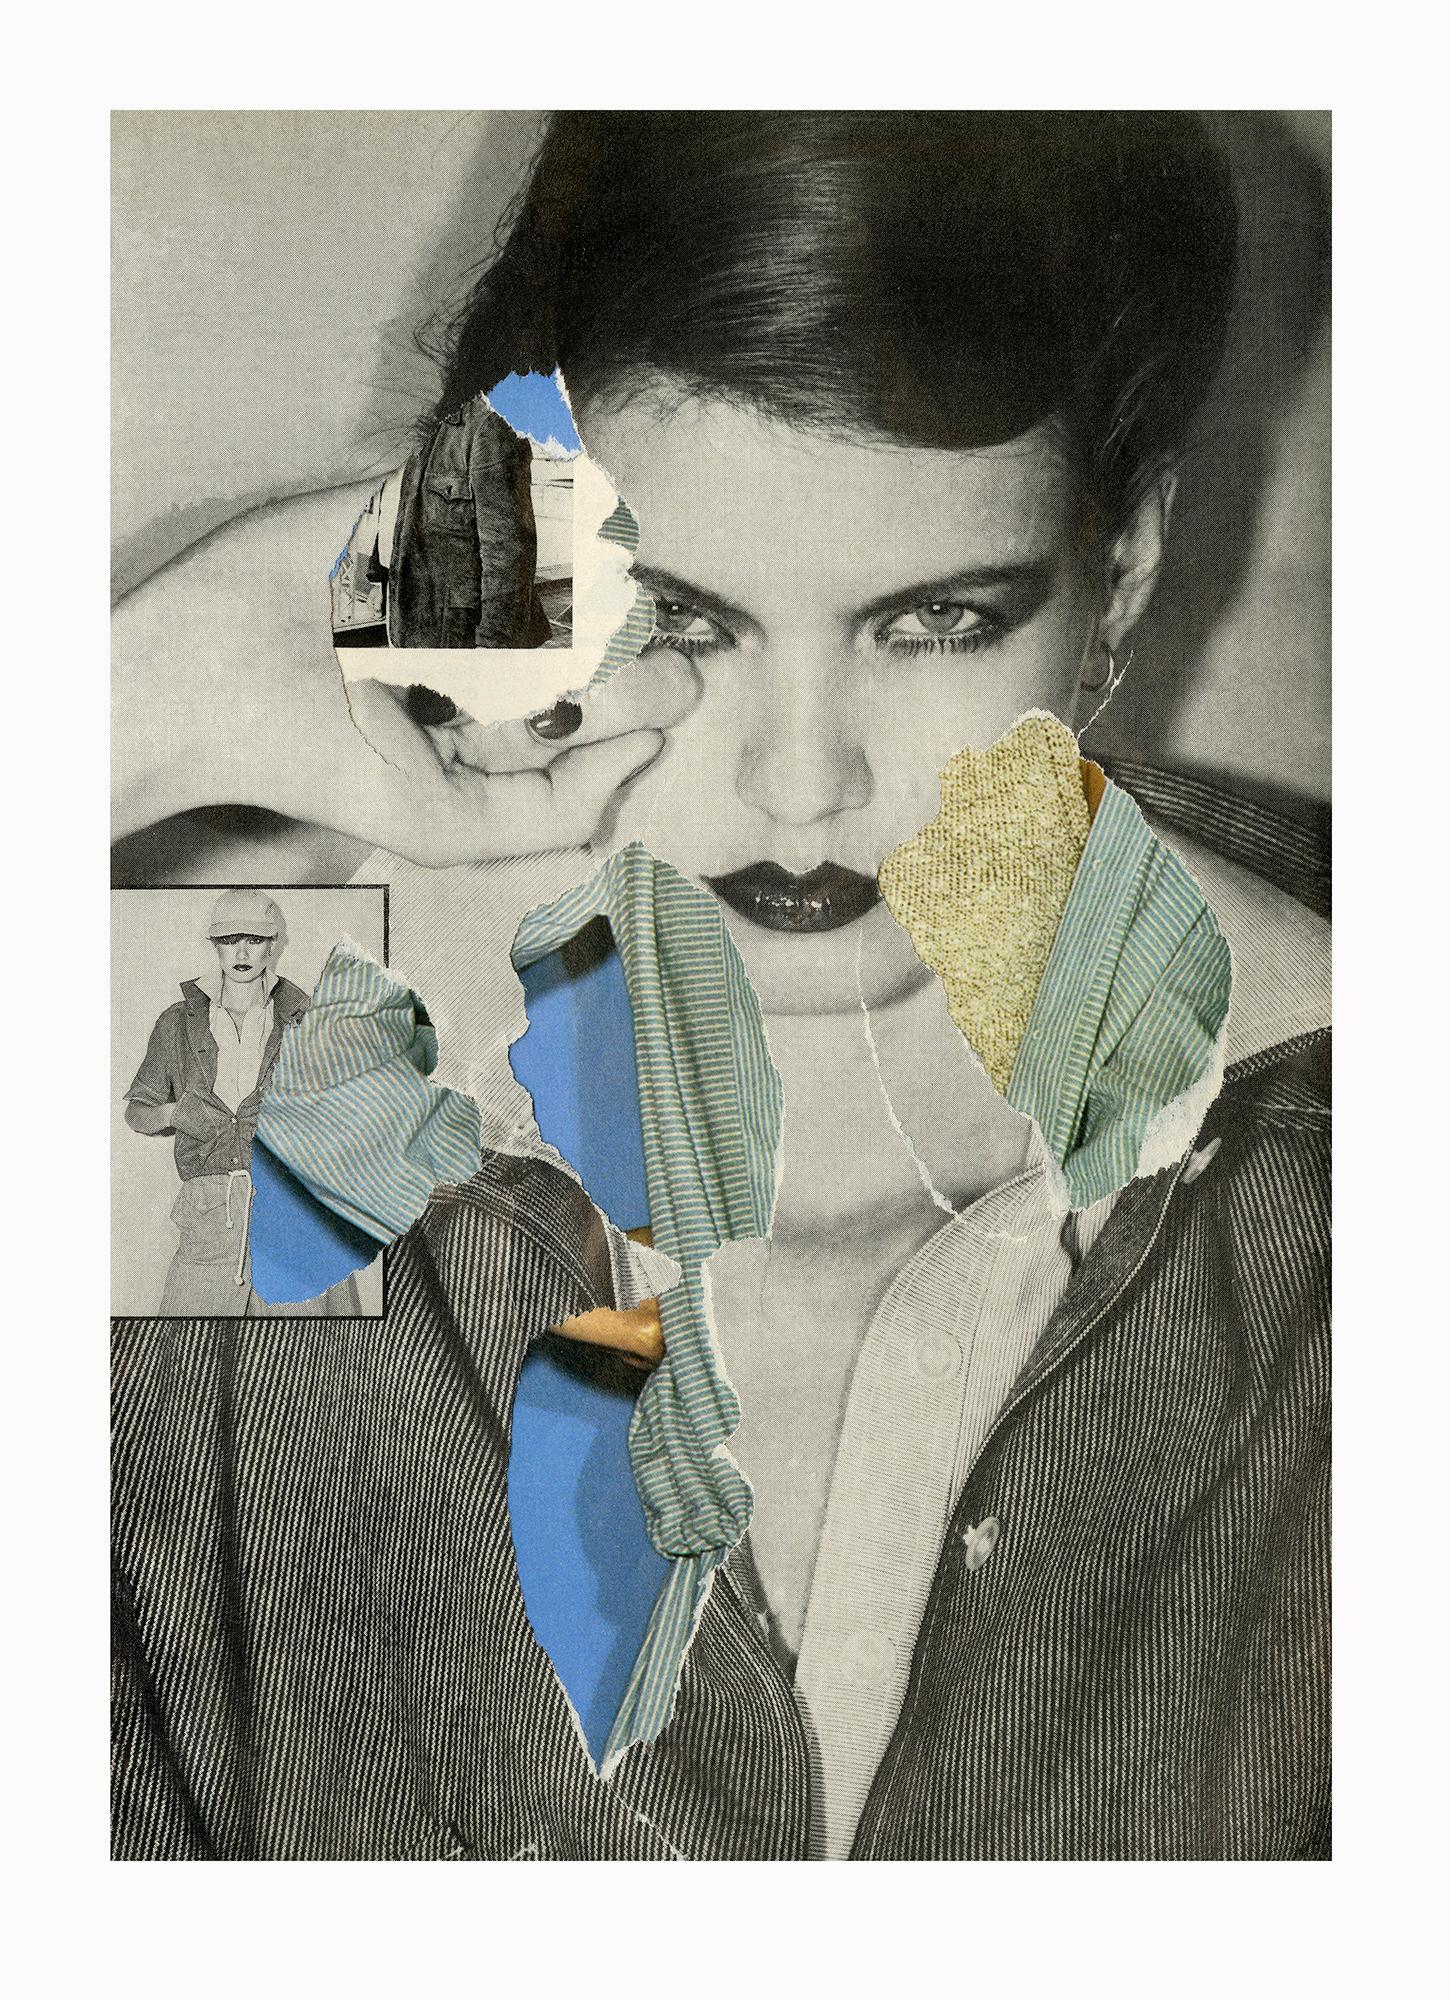 Inkjet Collage on Hahnemühle Photo
Rag Paper
Edition of 3

Ehryn Torrell is a London-based Canadian artist interested in visual culture and the myriad ways it impacts human experience and shapes ideas. Collage is central to her practice because it